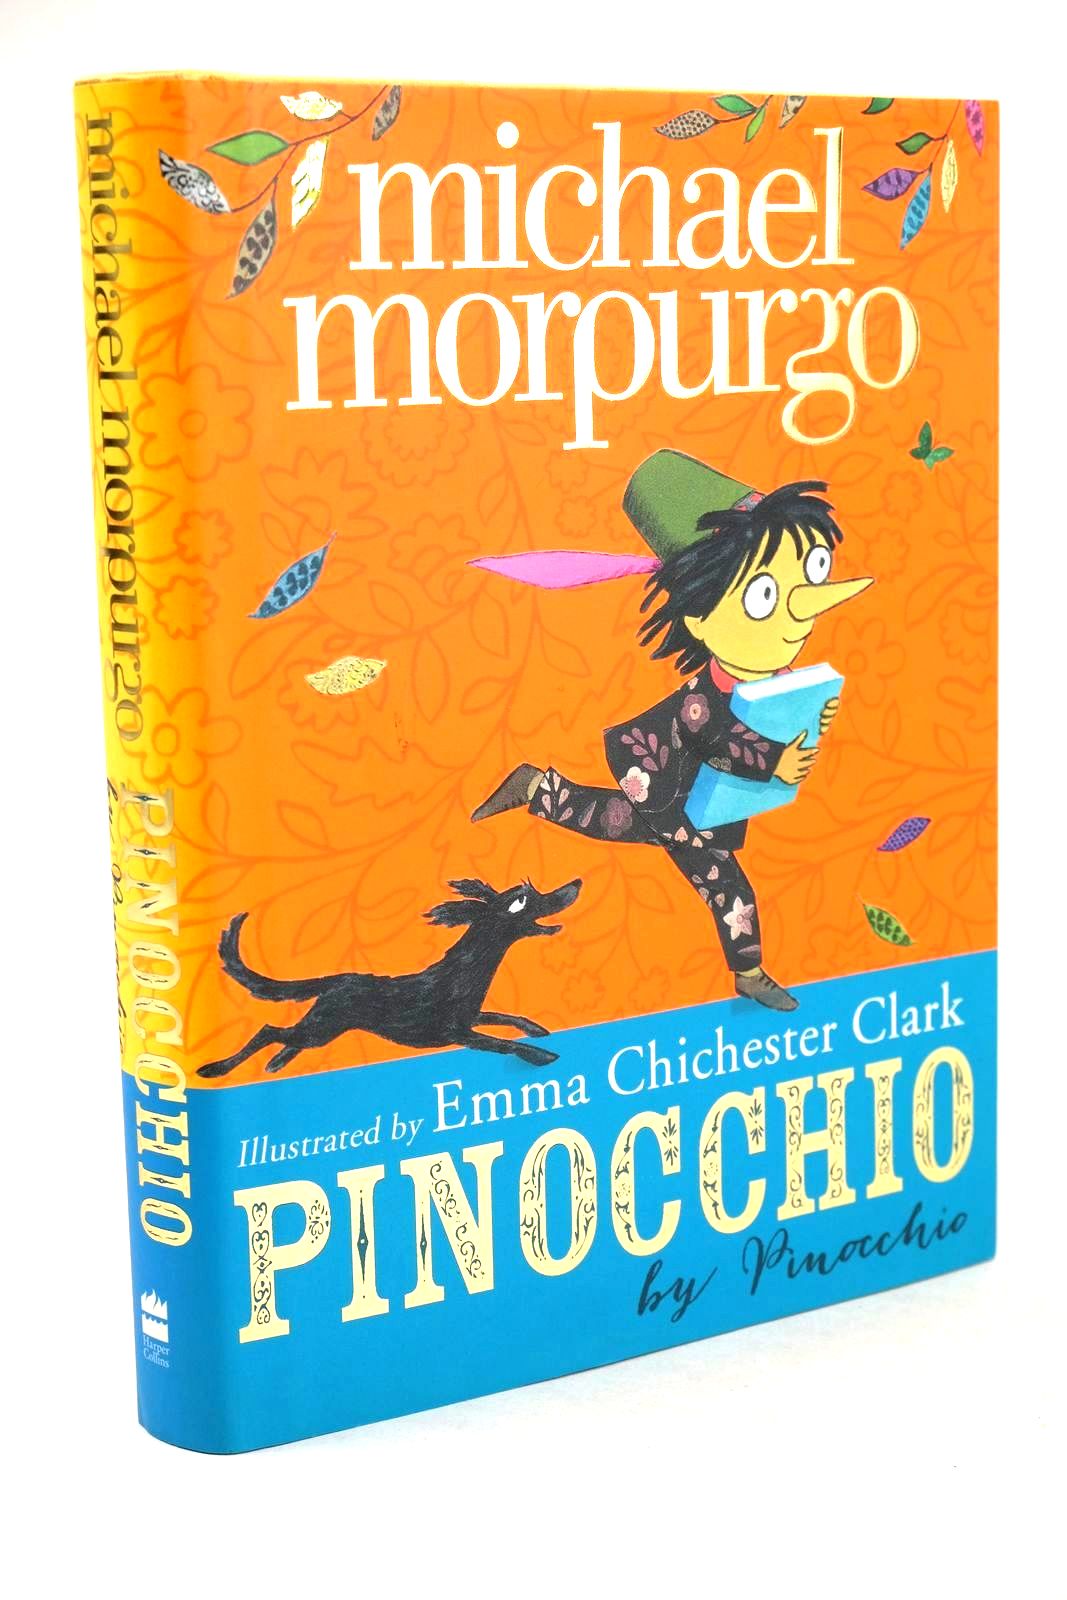 Photo of PINOCCHIO written by Morpurgo, Michael illustrated by Clark, Emma Chichester published by Harper Collins Childrens Books (STOCK CODE: 1326475)  for sale by Stella & Rose's Books